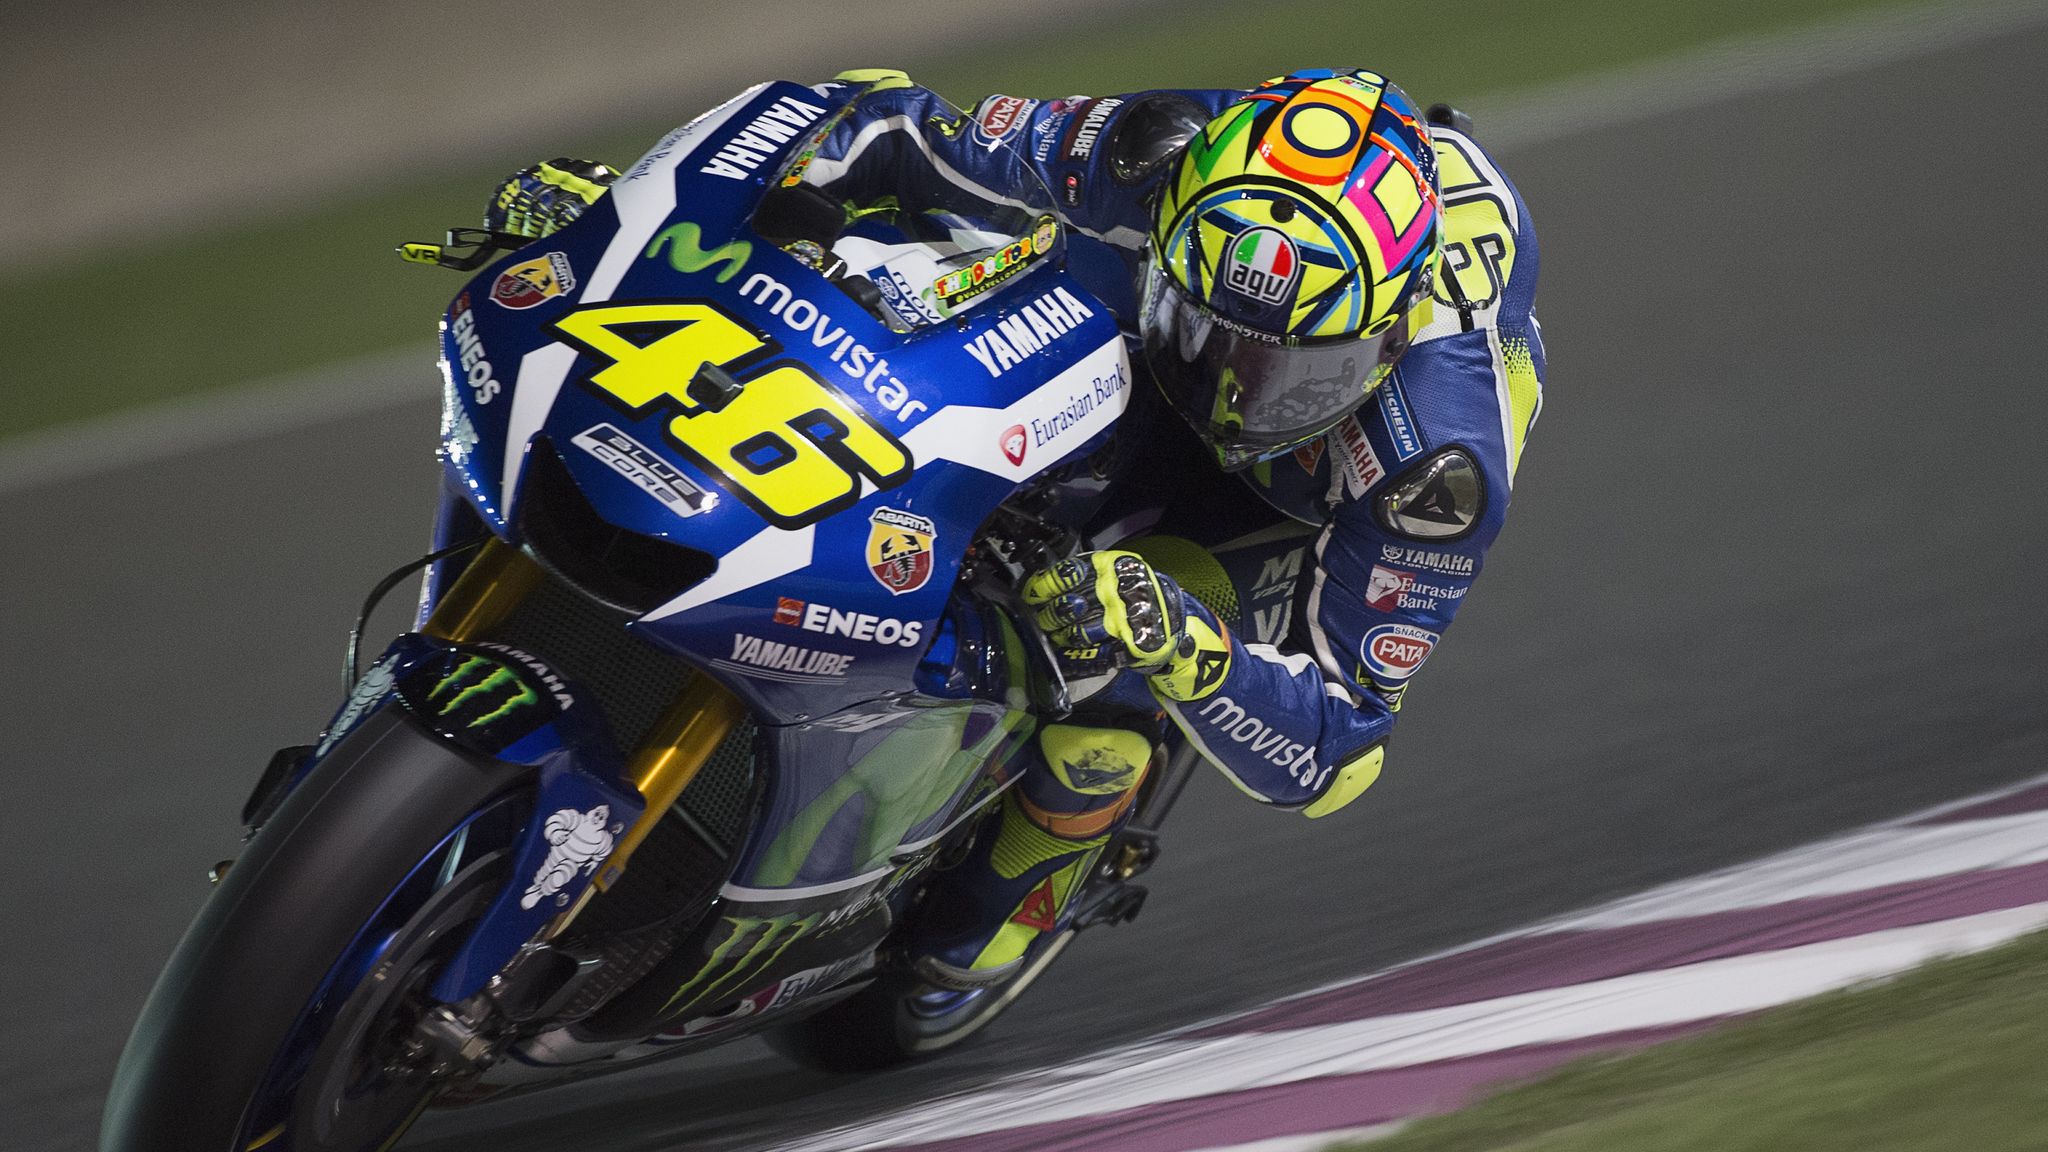 Yamaha sign Valentino Rossi to deal through end of 2018 season Motor Racing News Sky Sports